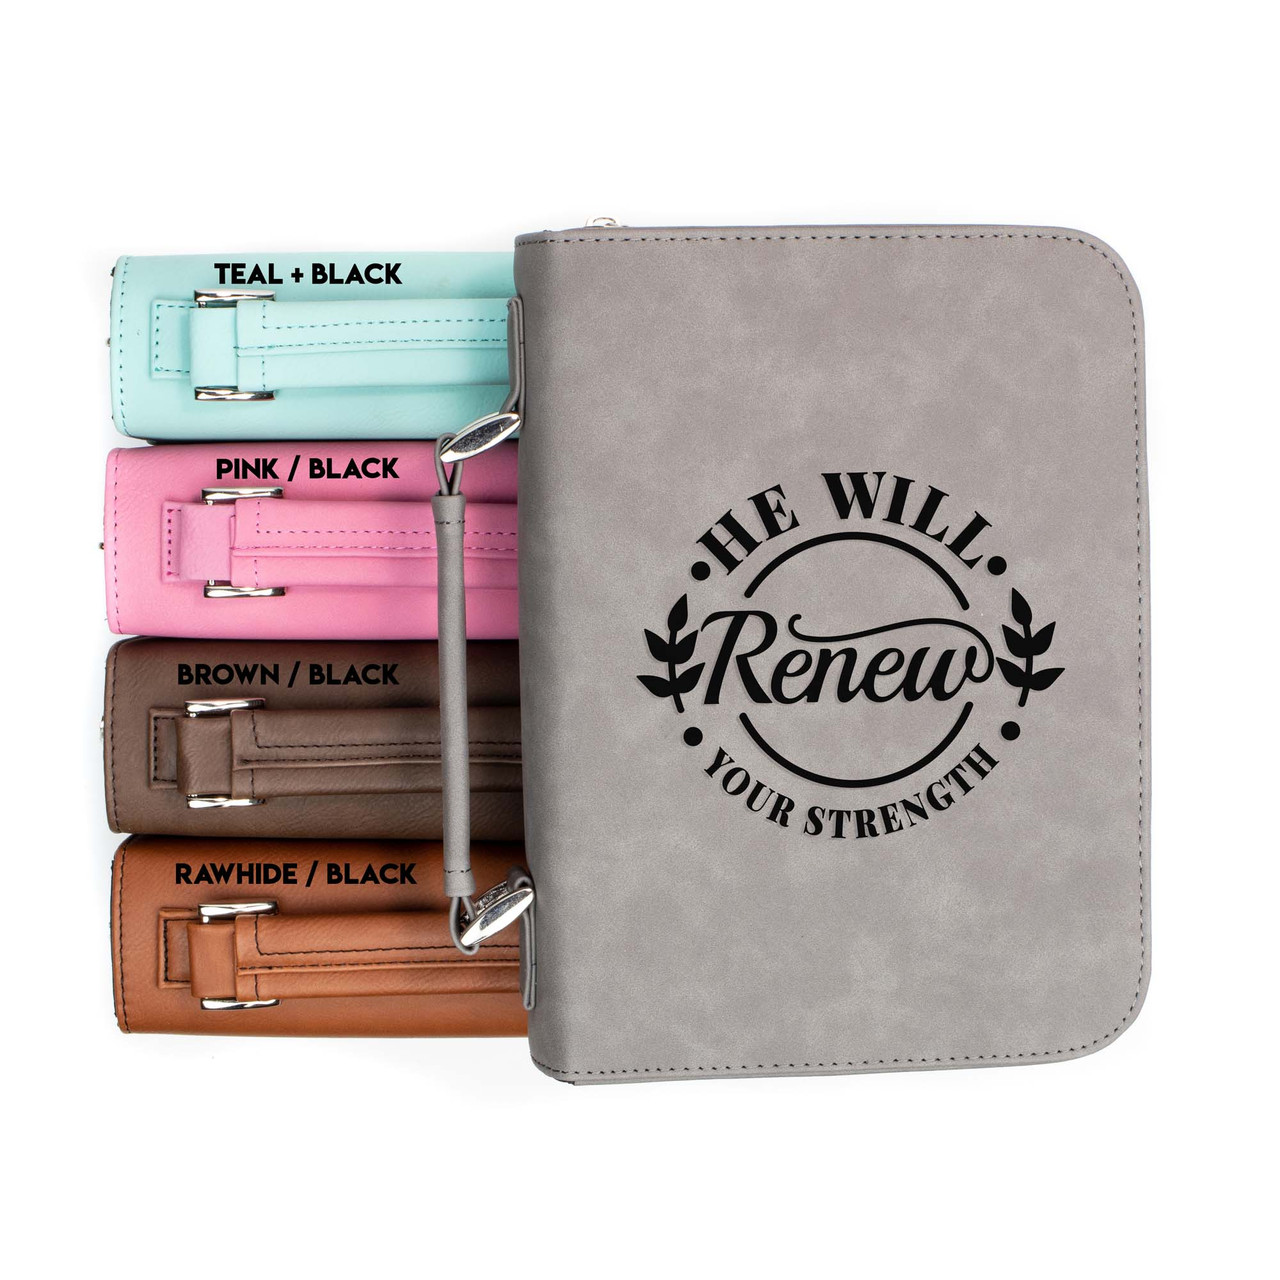 He Will Renew Your Strength Faux Leather Bible Cover